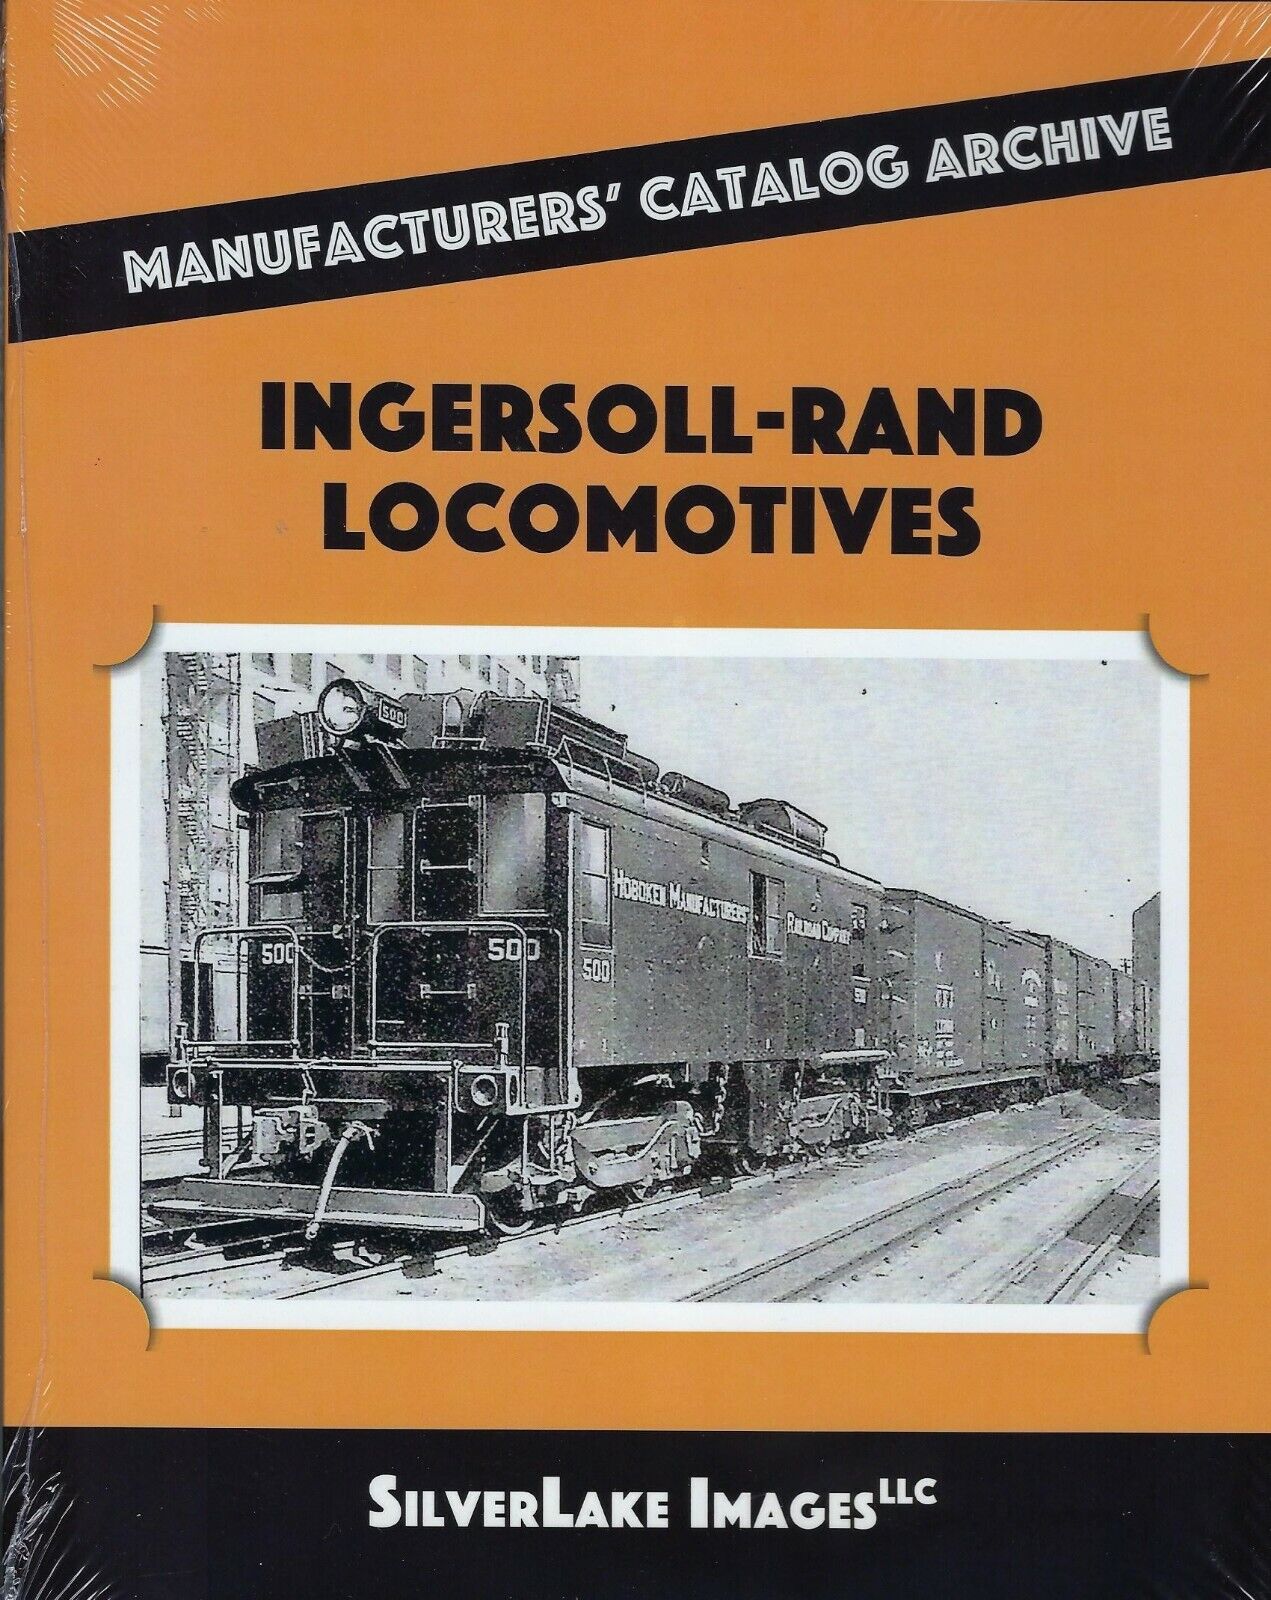 INGERSOLL-RAND LOCOMOTIVES from Manufacturers' Catalog Archive (BRAND NEW BOOK)